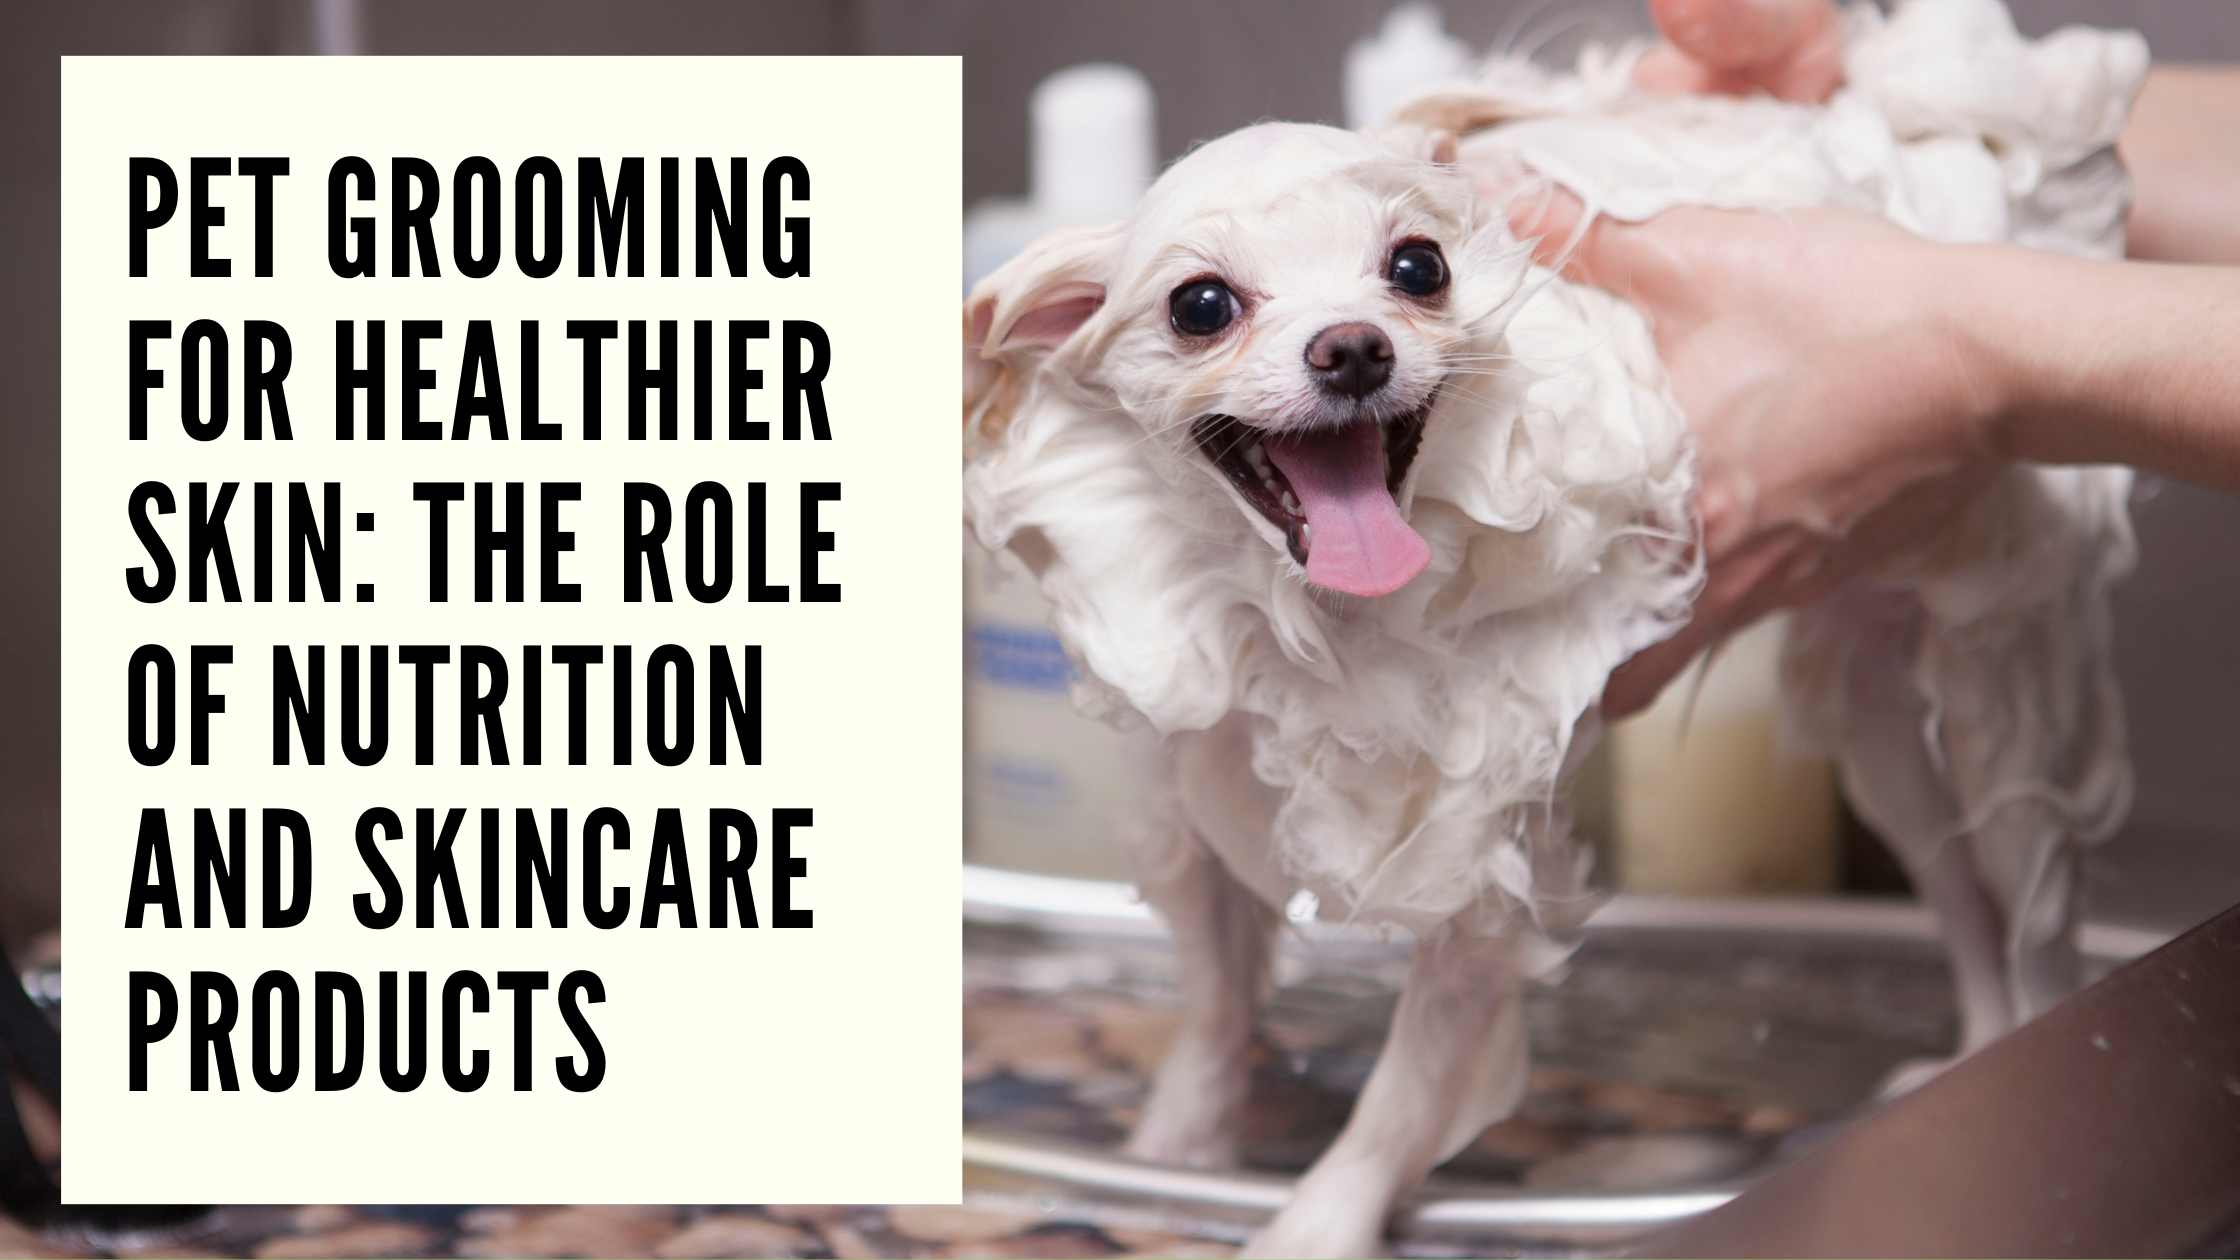 Pet Grooming for Healthier Skin The Role of Nutrition and Skincare Products